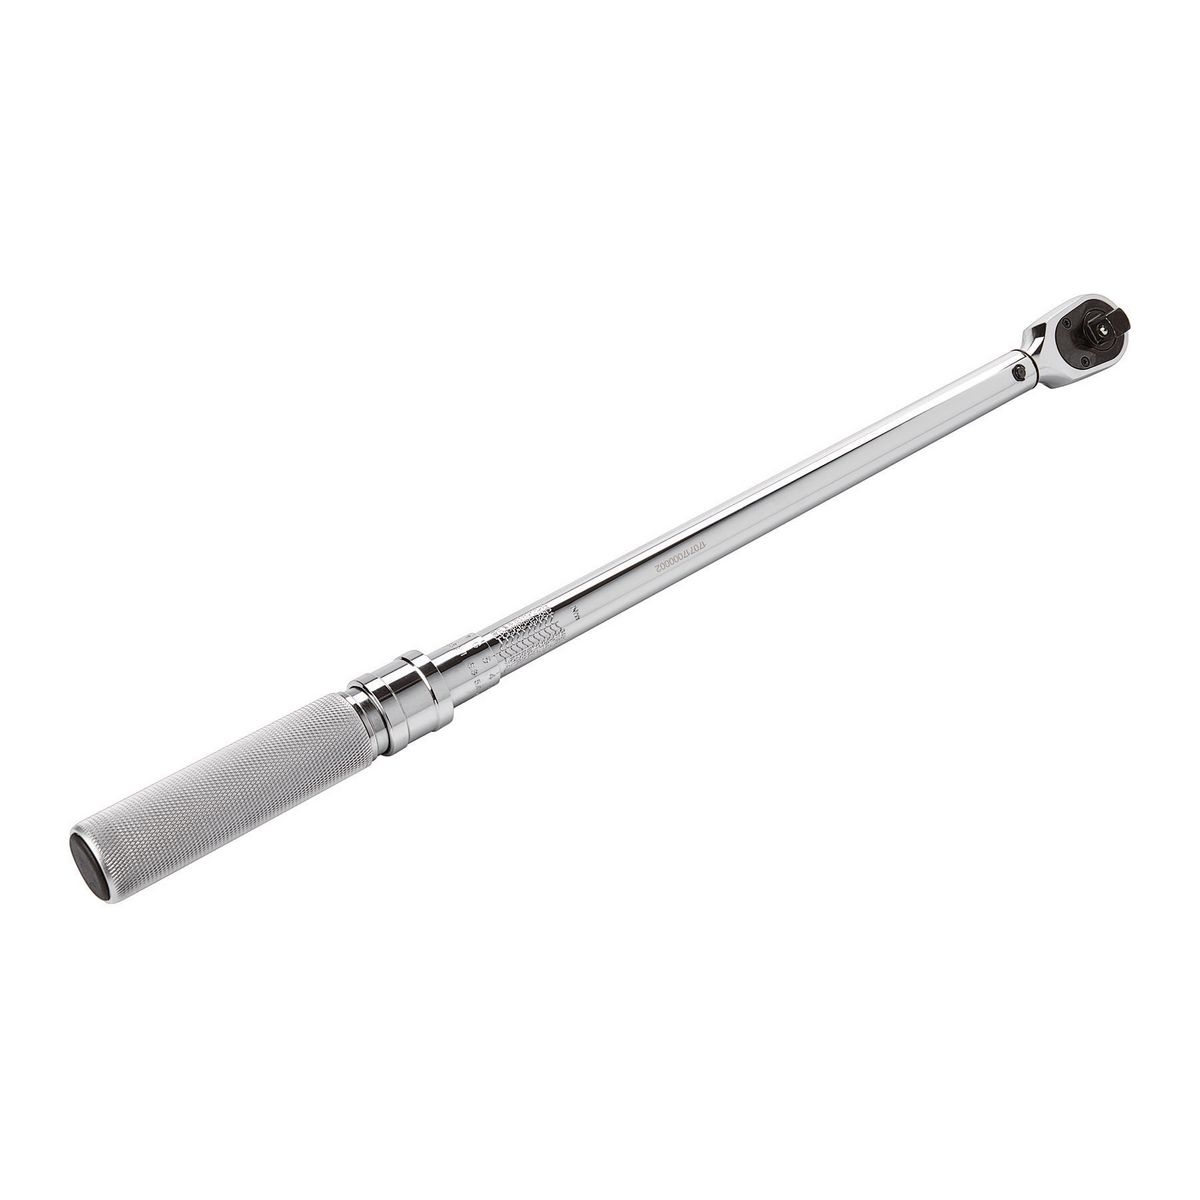 ICON 1/2 in. 50-250 ft. lb. Professional Torque Wrench – Item 64064